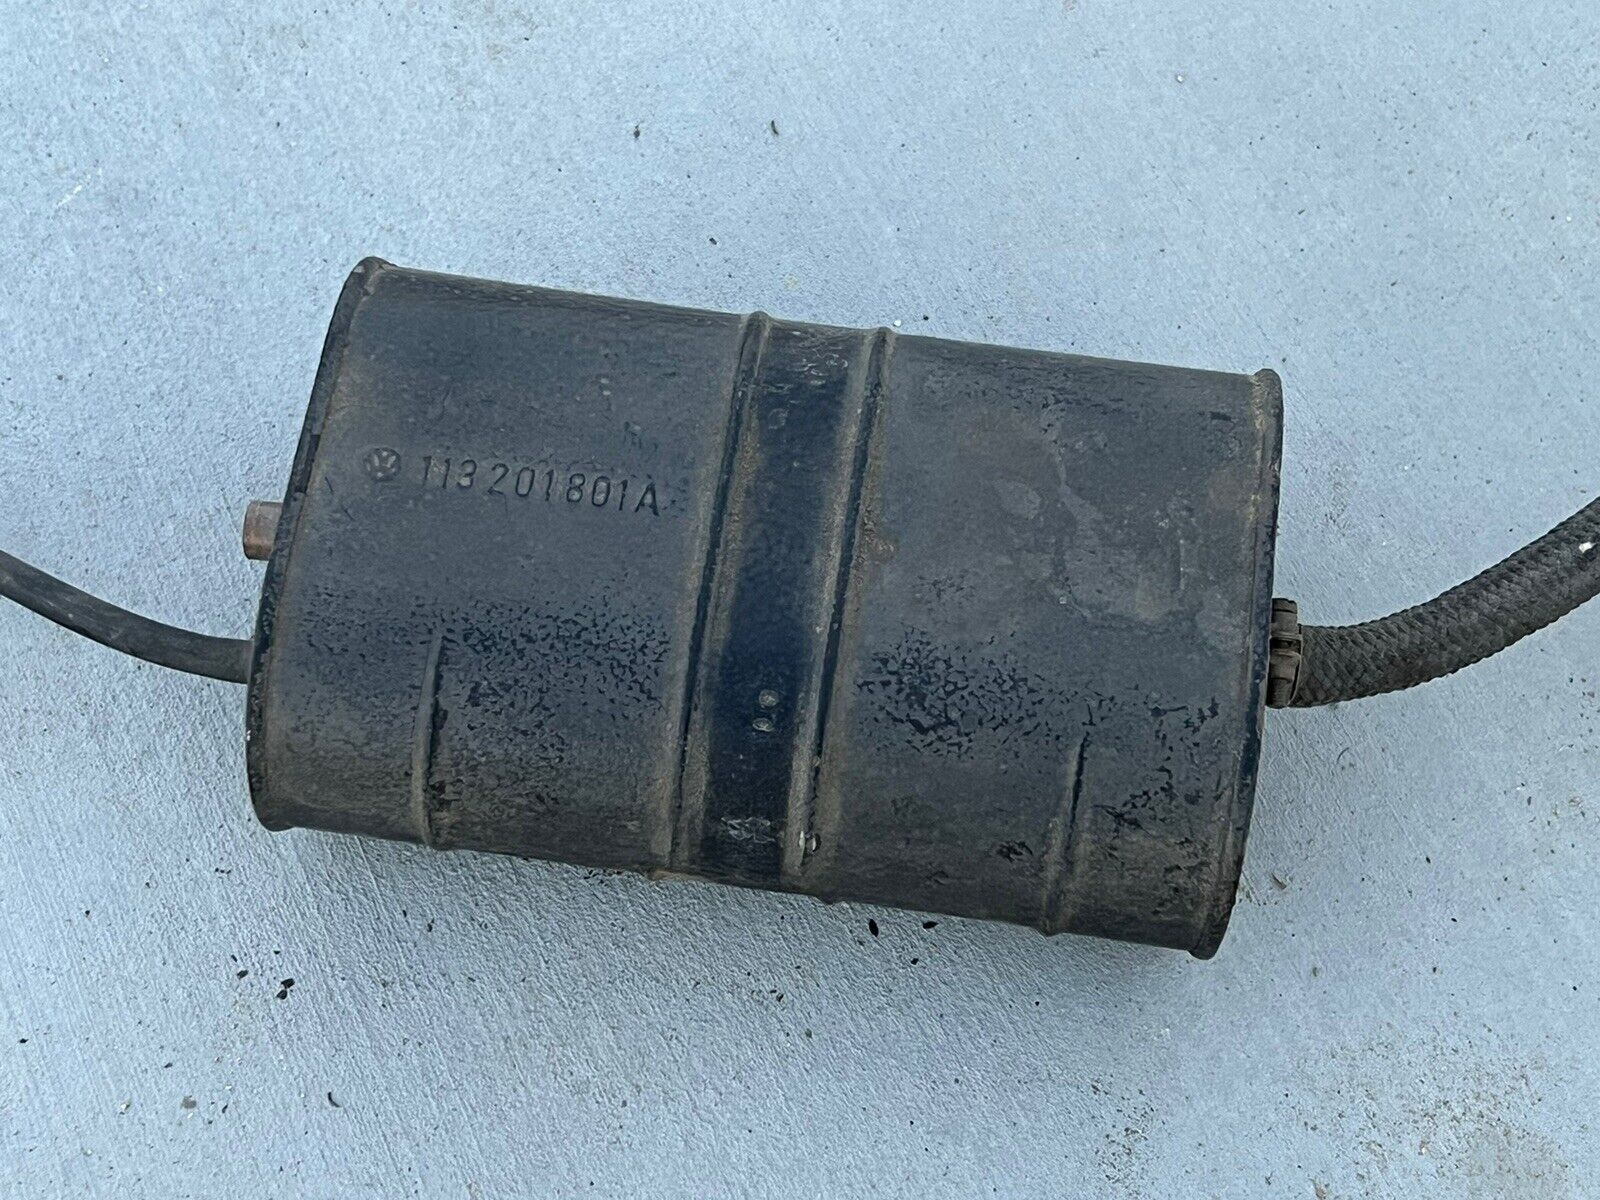 Porsche 911 912 914 OEM Charcoal Canister 113201801A VW 68 - 74 yr